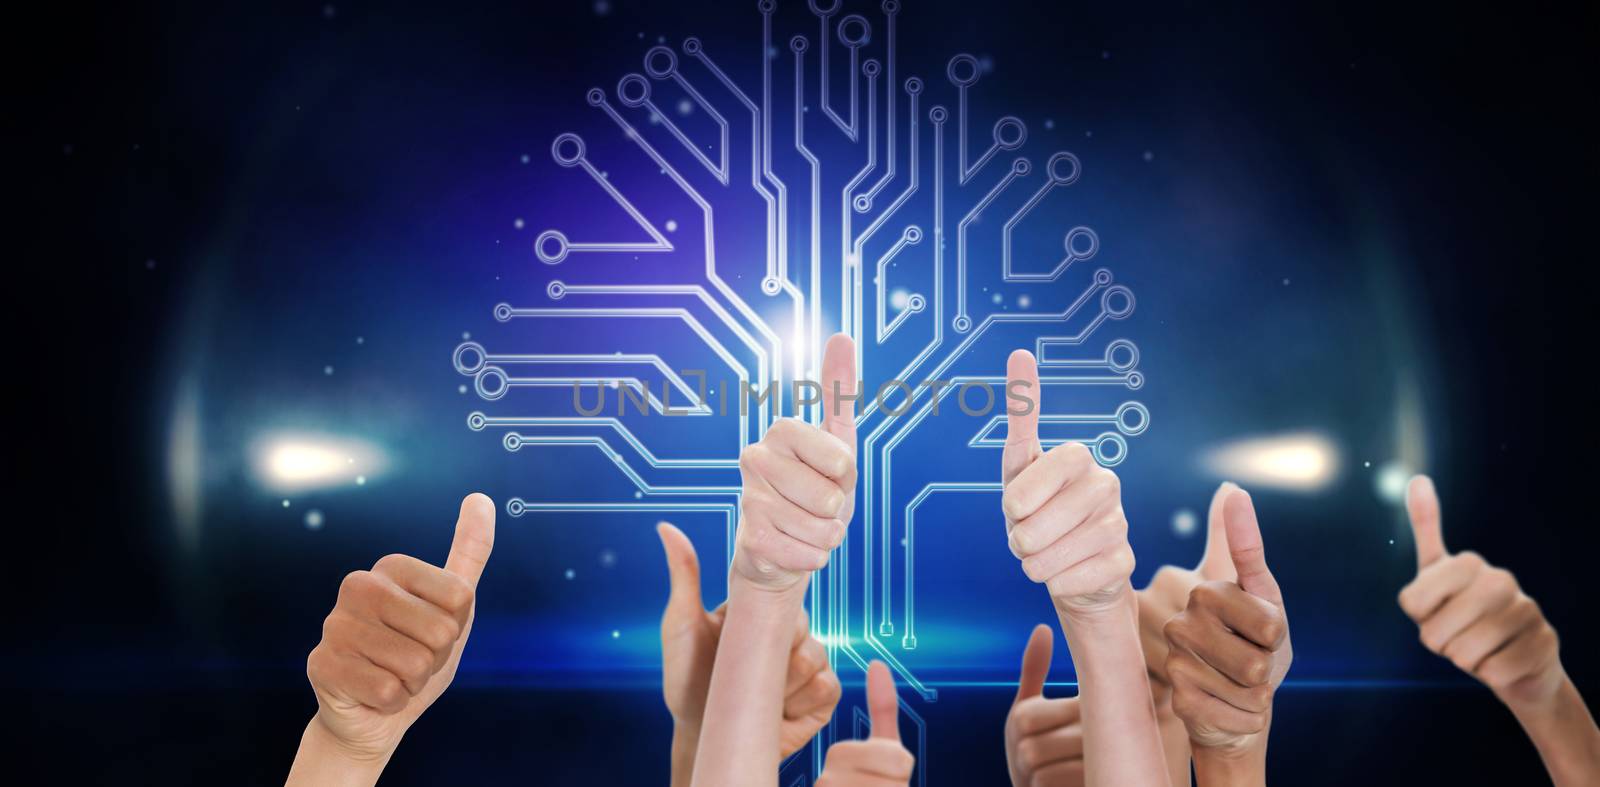 Thumbsup against technology background